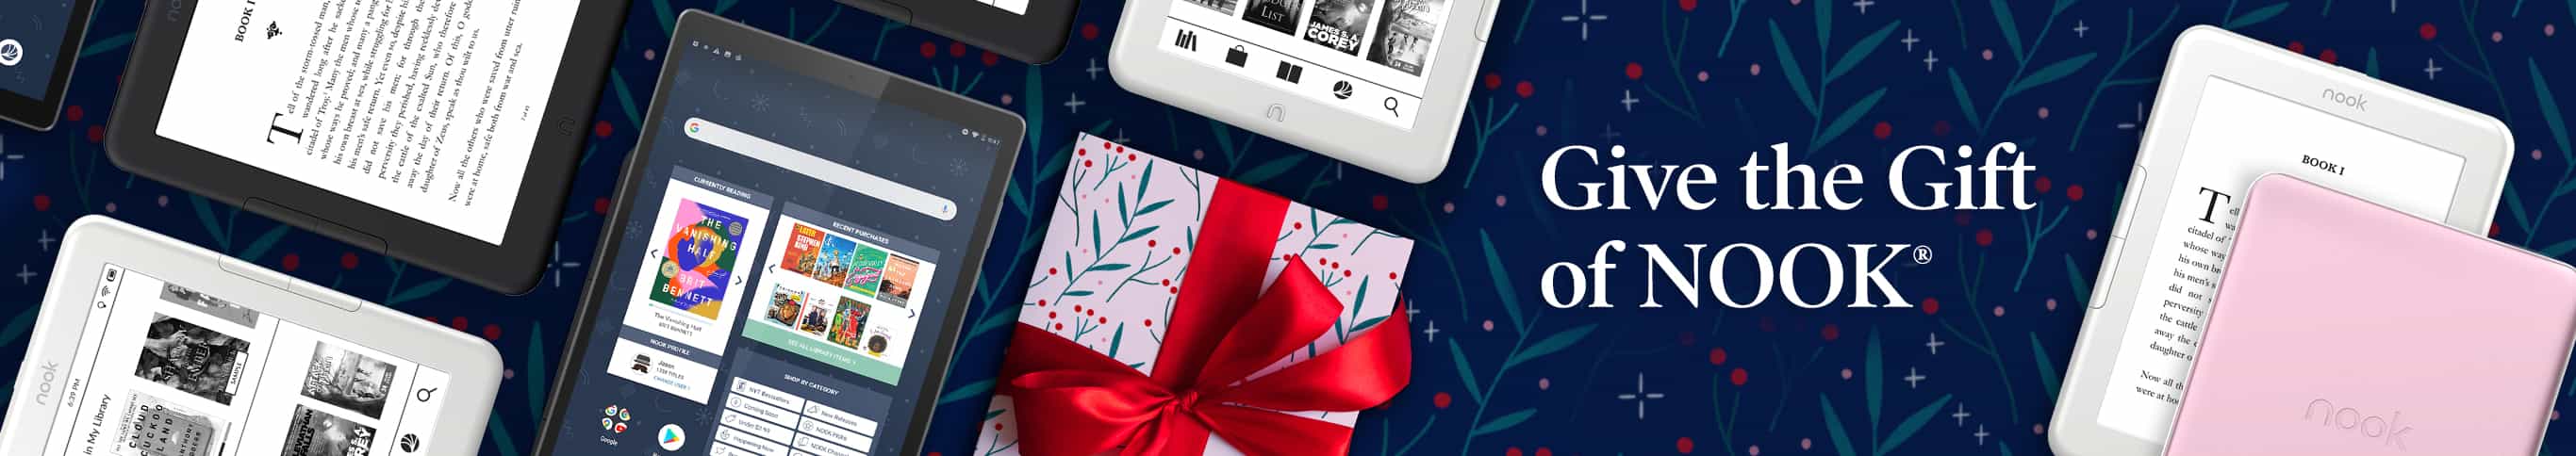 Give the Gift of NOOK